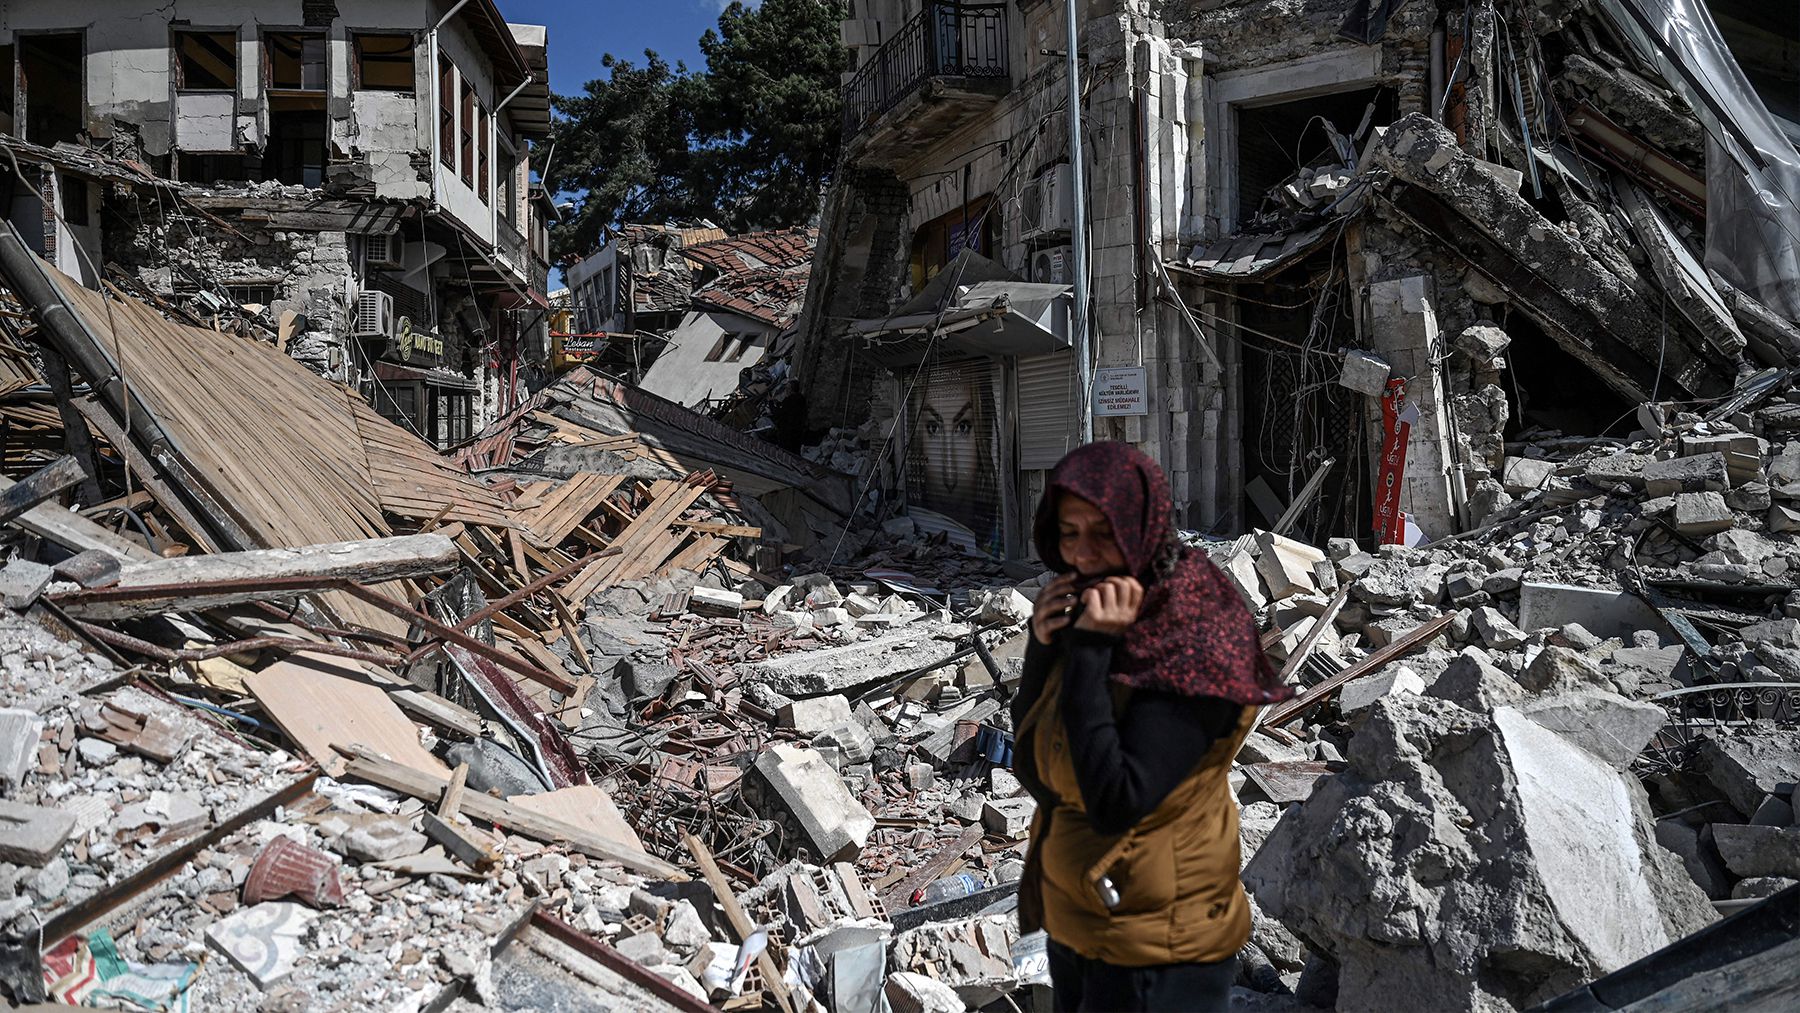 Union Group Calls on Brands to Support Garment Workers After Turkey Quake